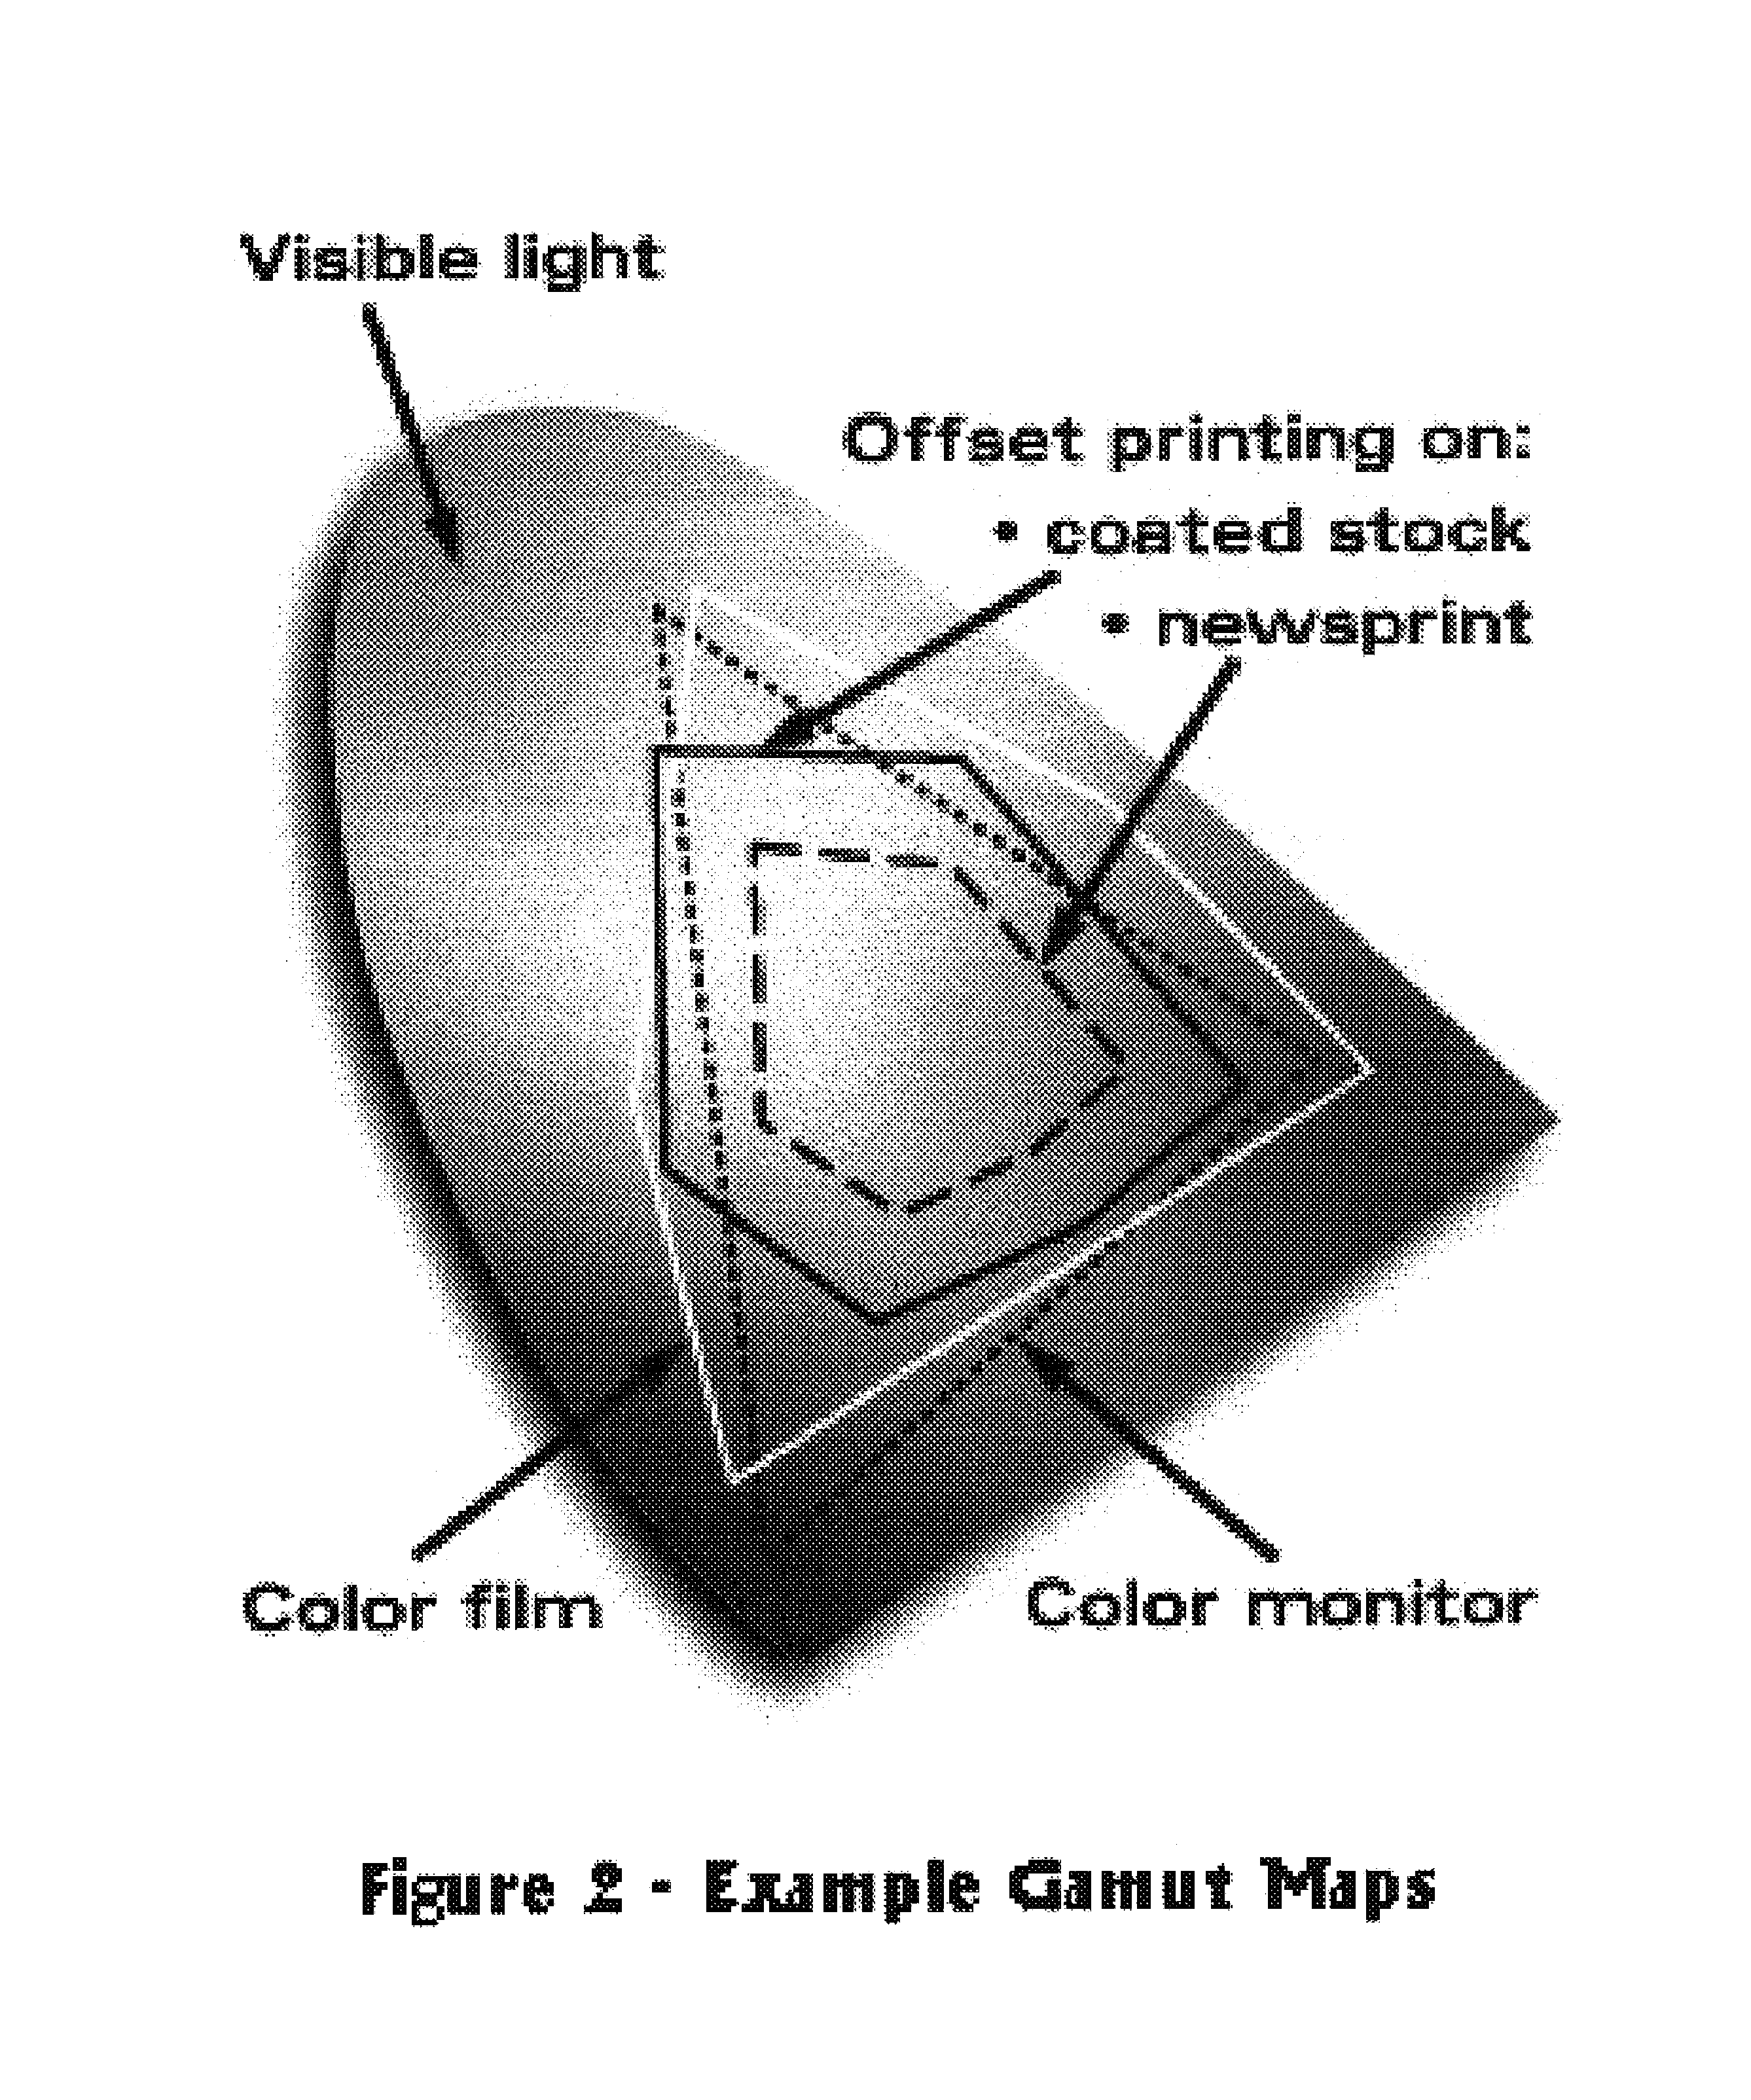 Method for generating customized ink/media transforms